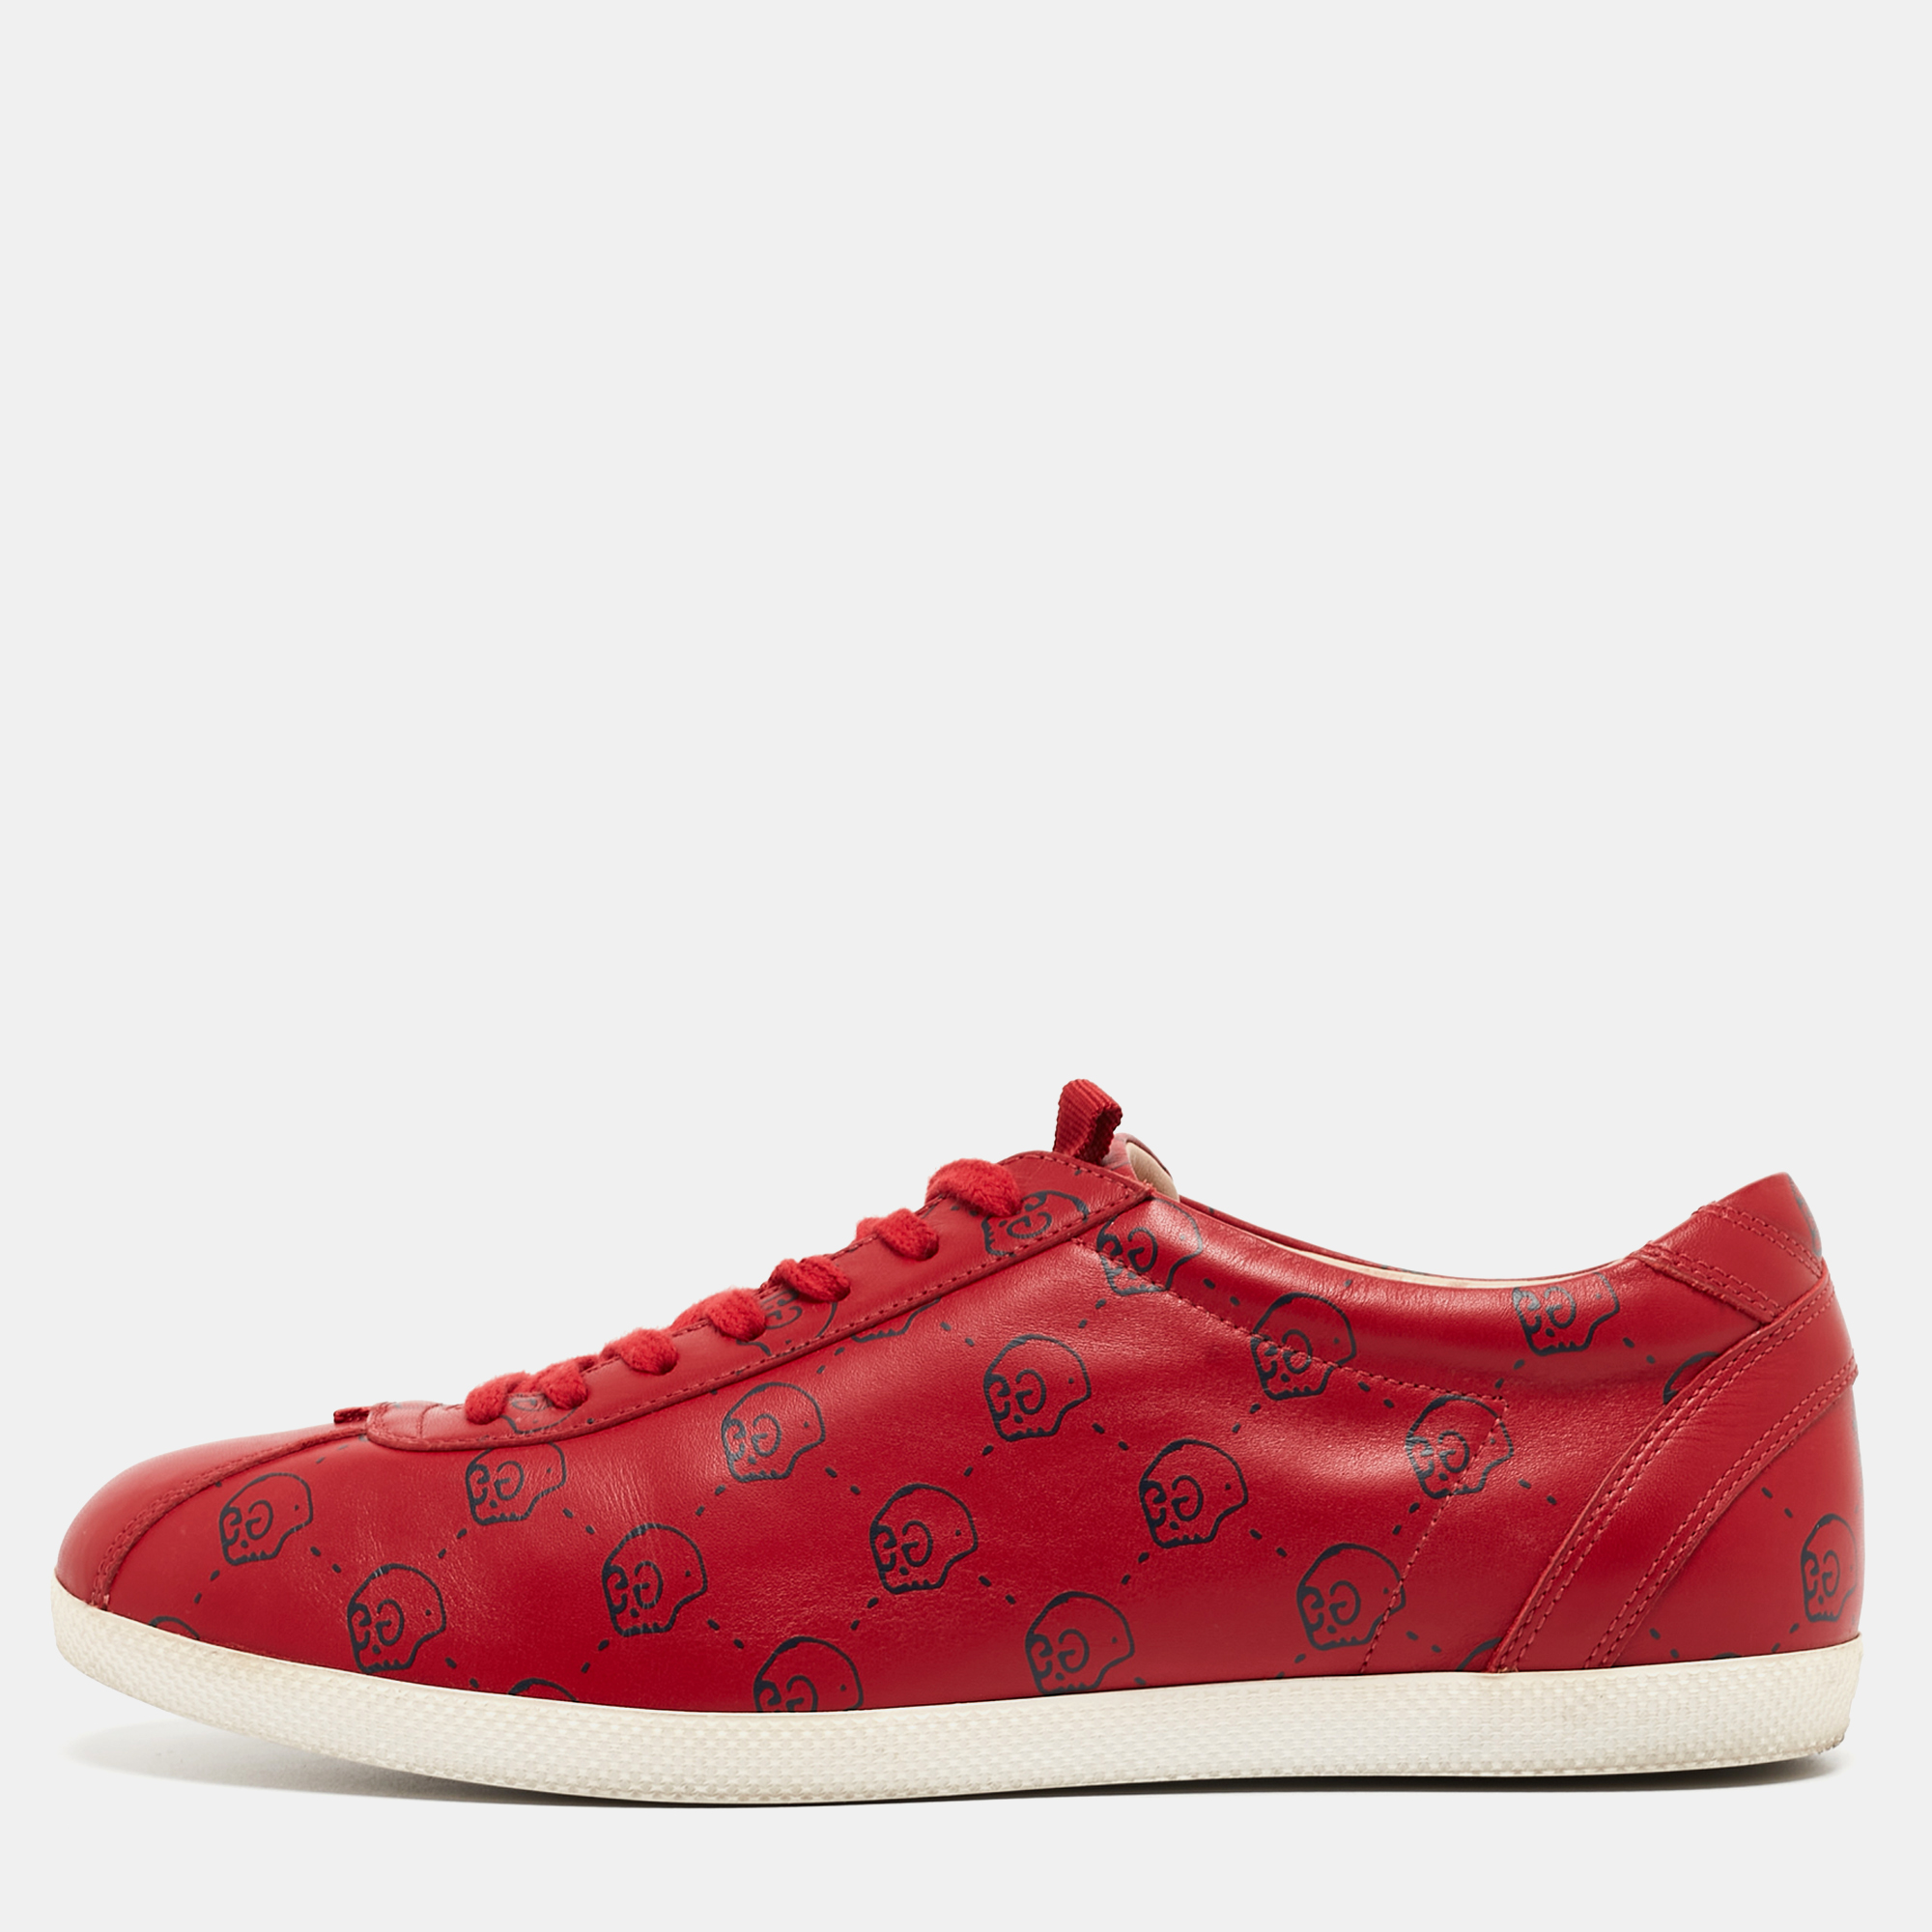 Gucci Red Leather Gucci Ghost Print Low Top Sneakers Size 42.5